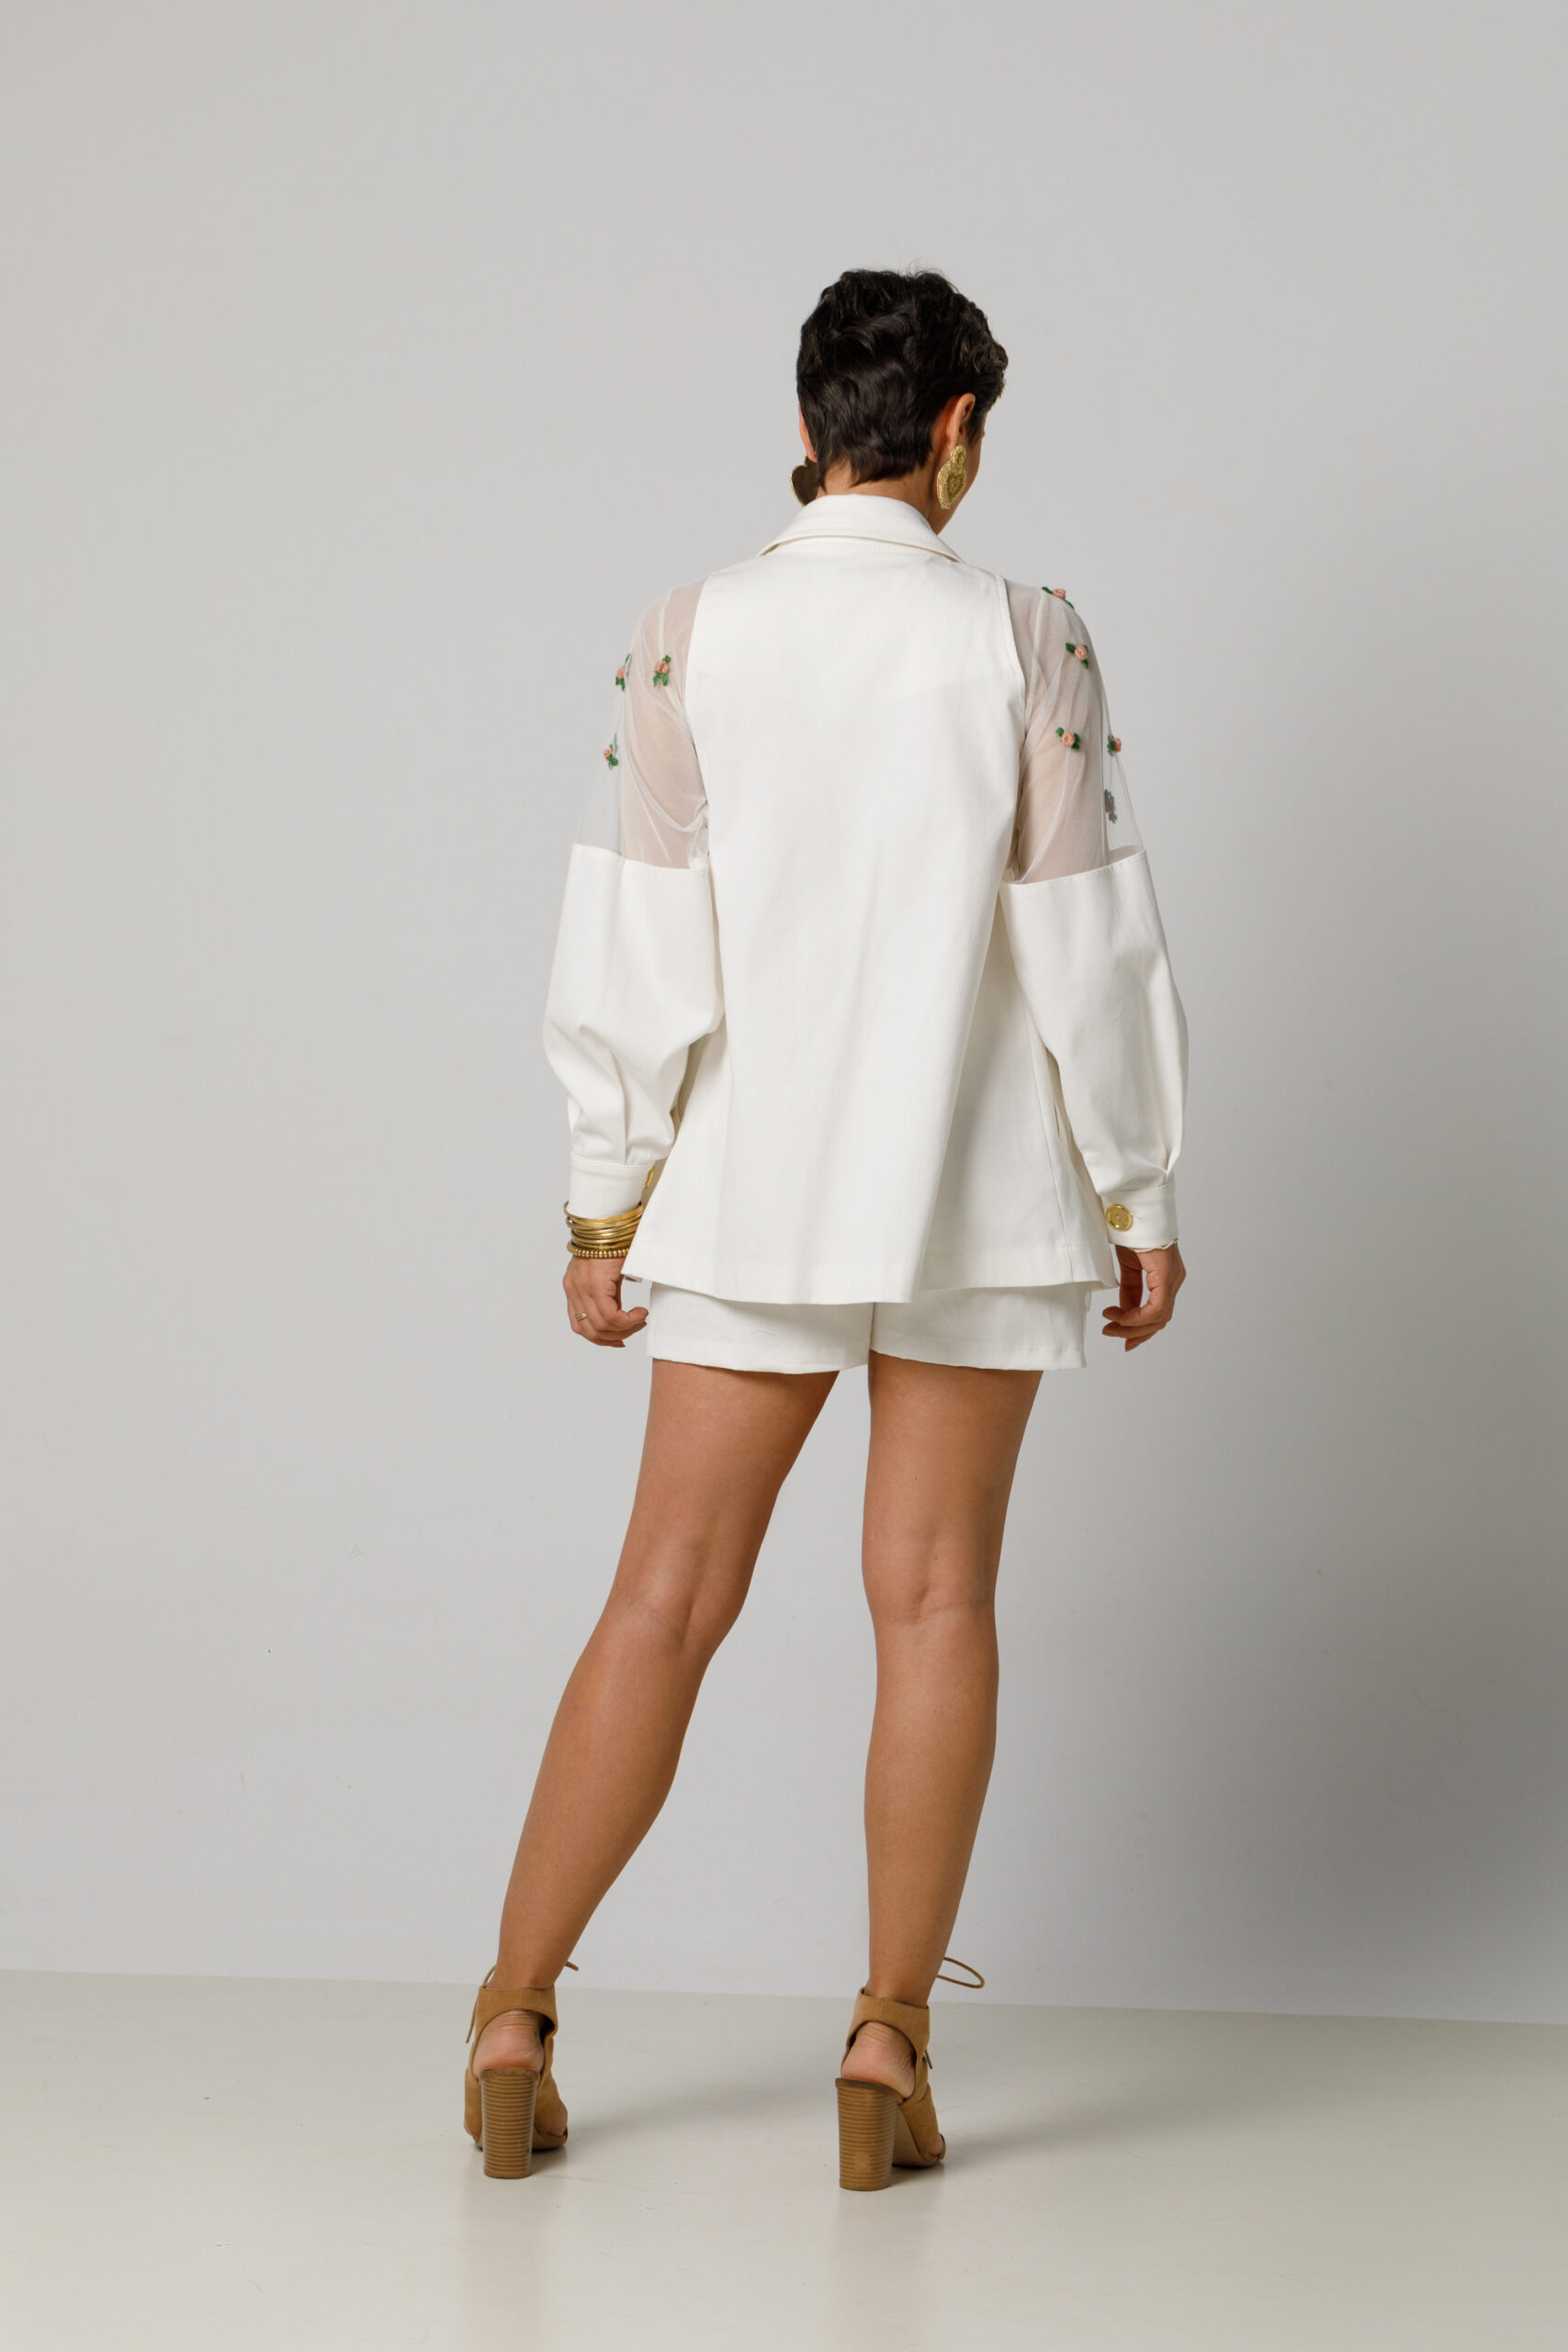 INEZ  White jacket with embroidered transparent shoulders. Natural fabrics, original design, handmade embroidery